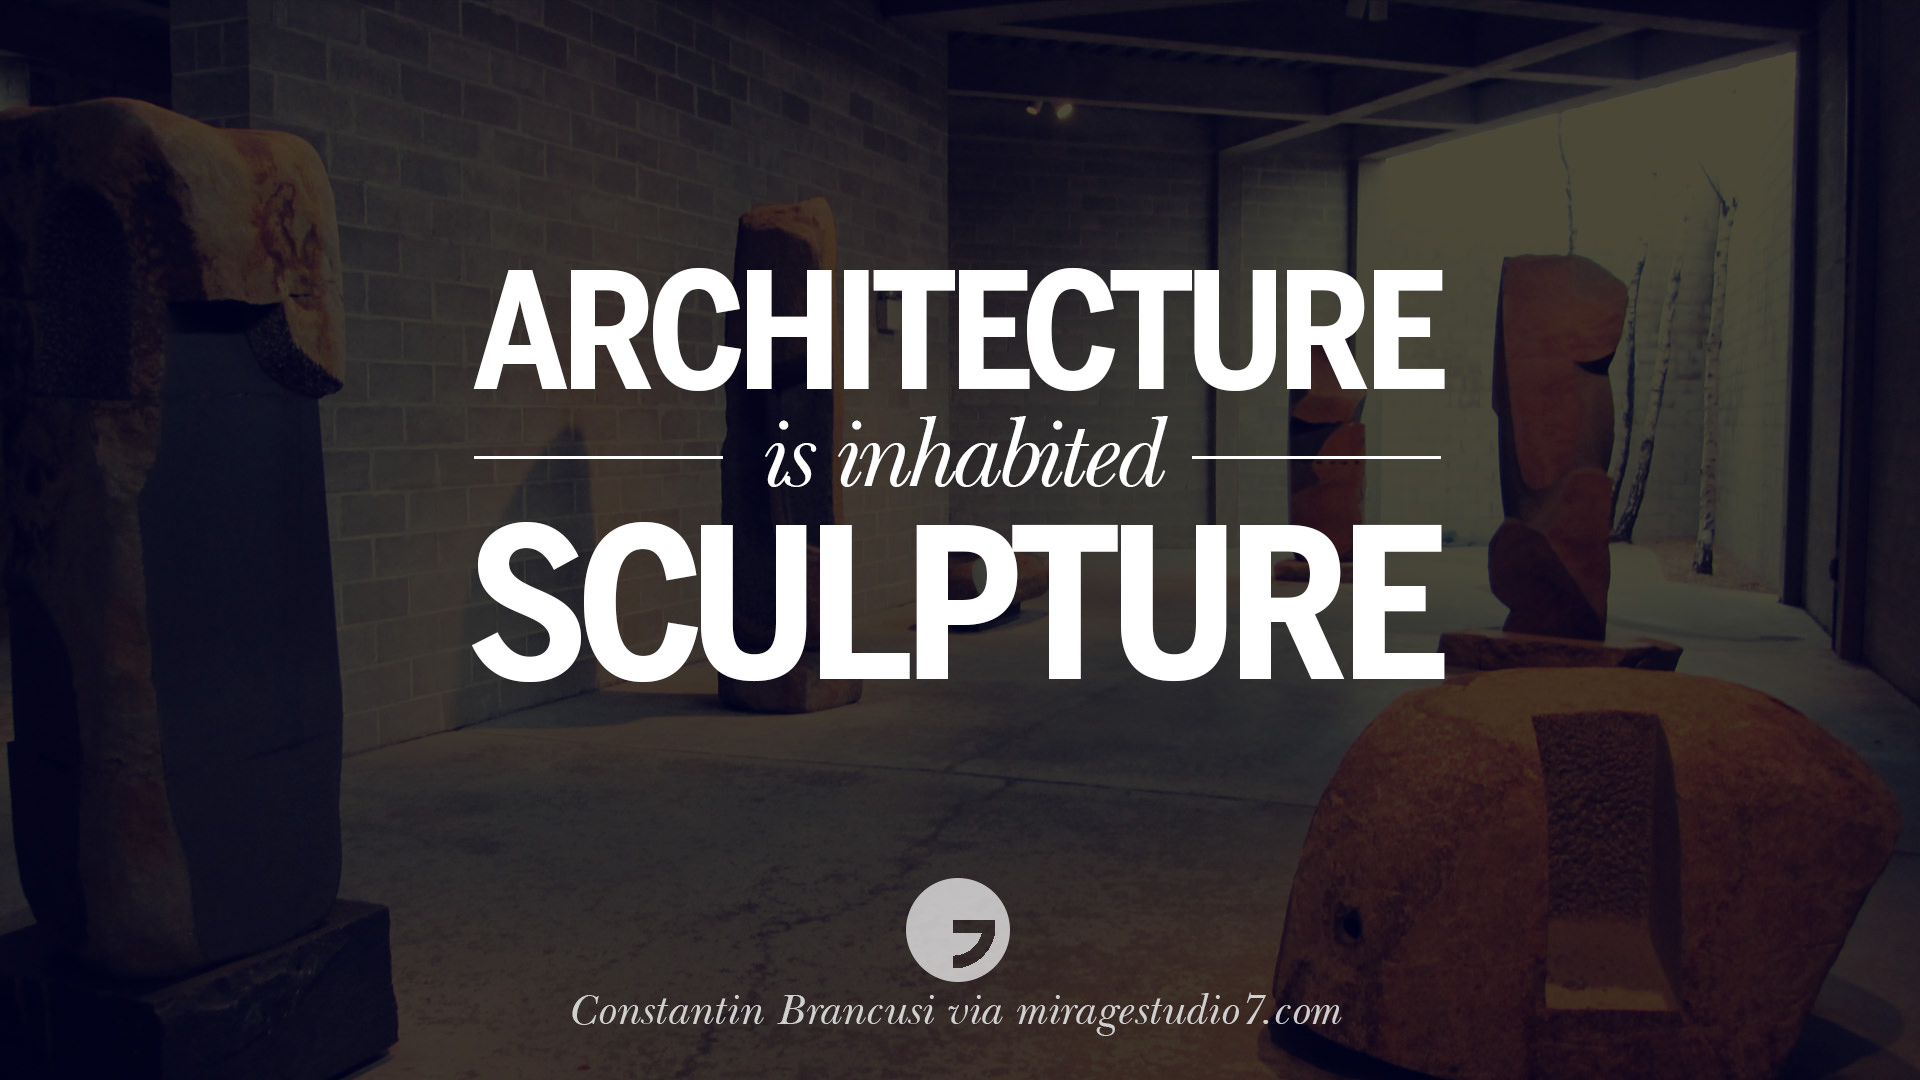 28 Inspirational Architecture Quotes by Famous Architects